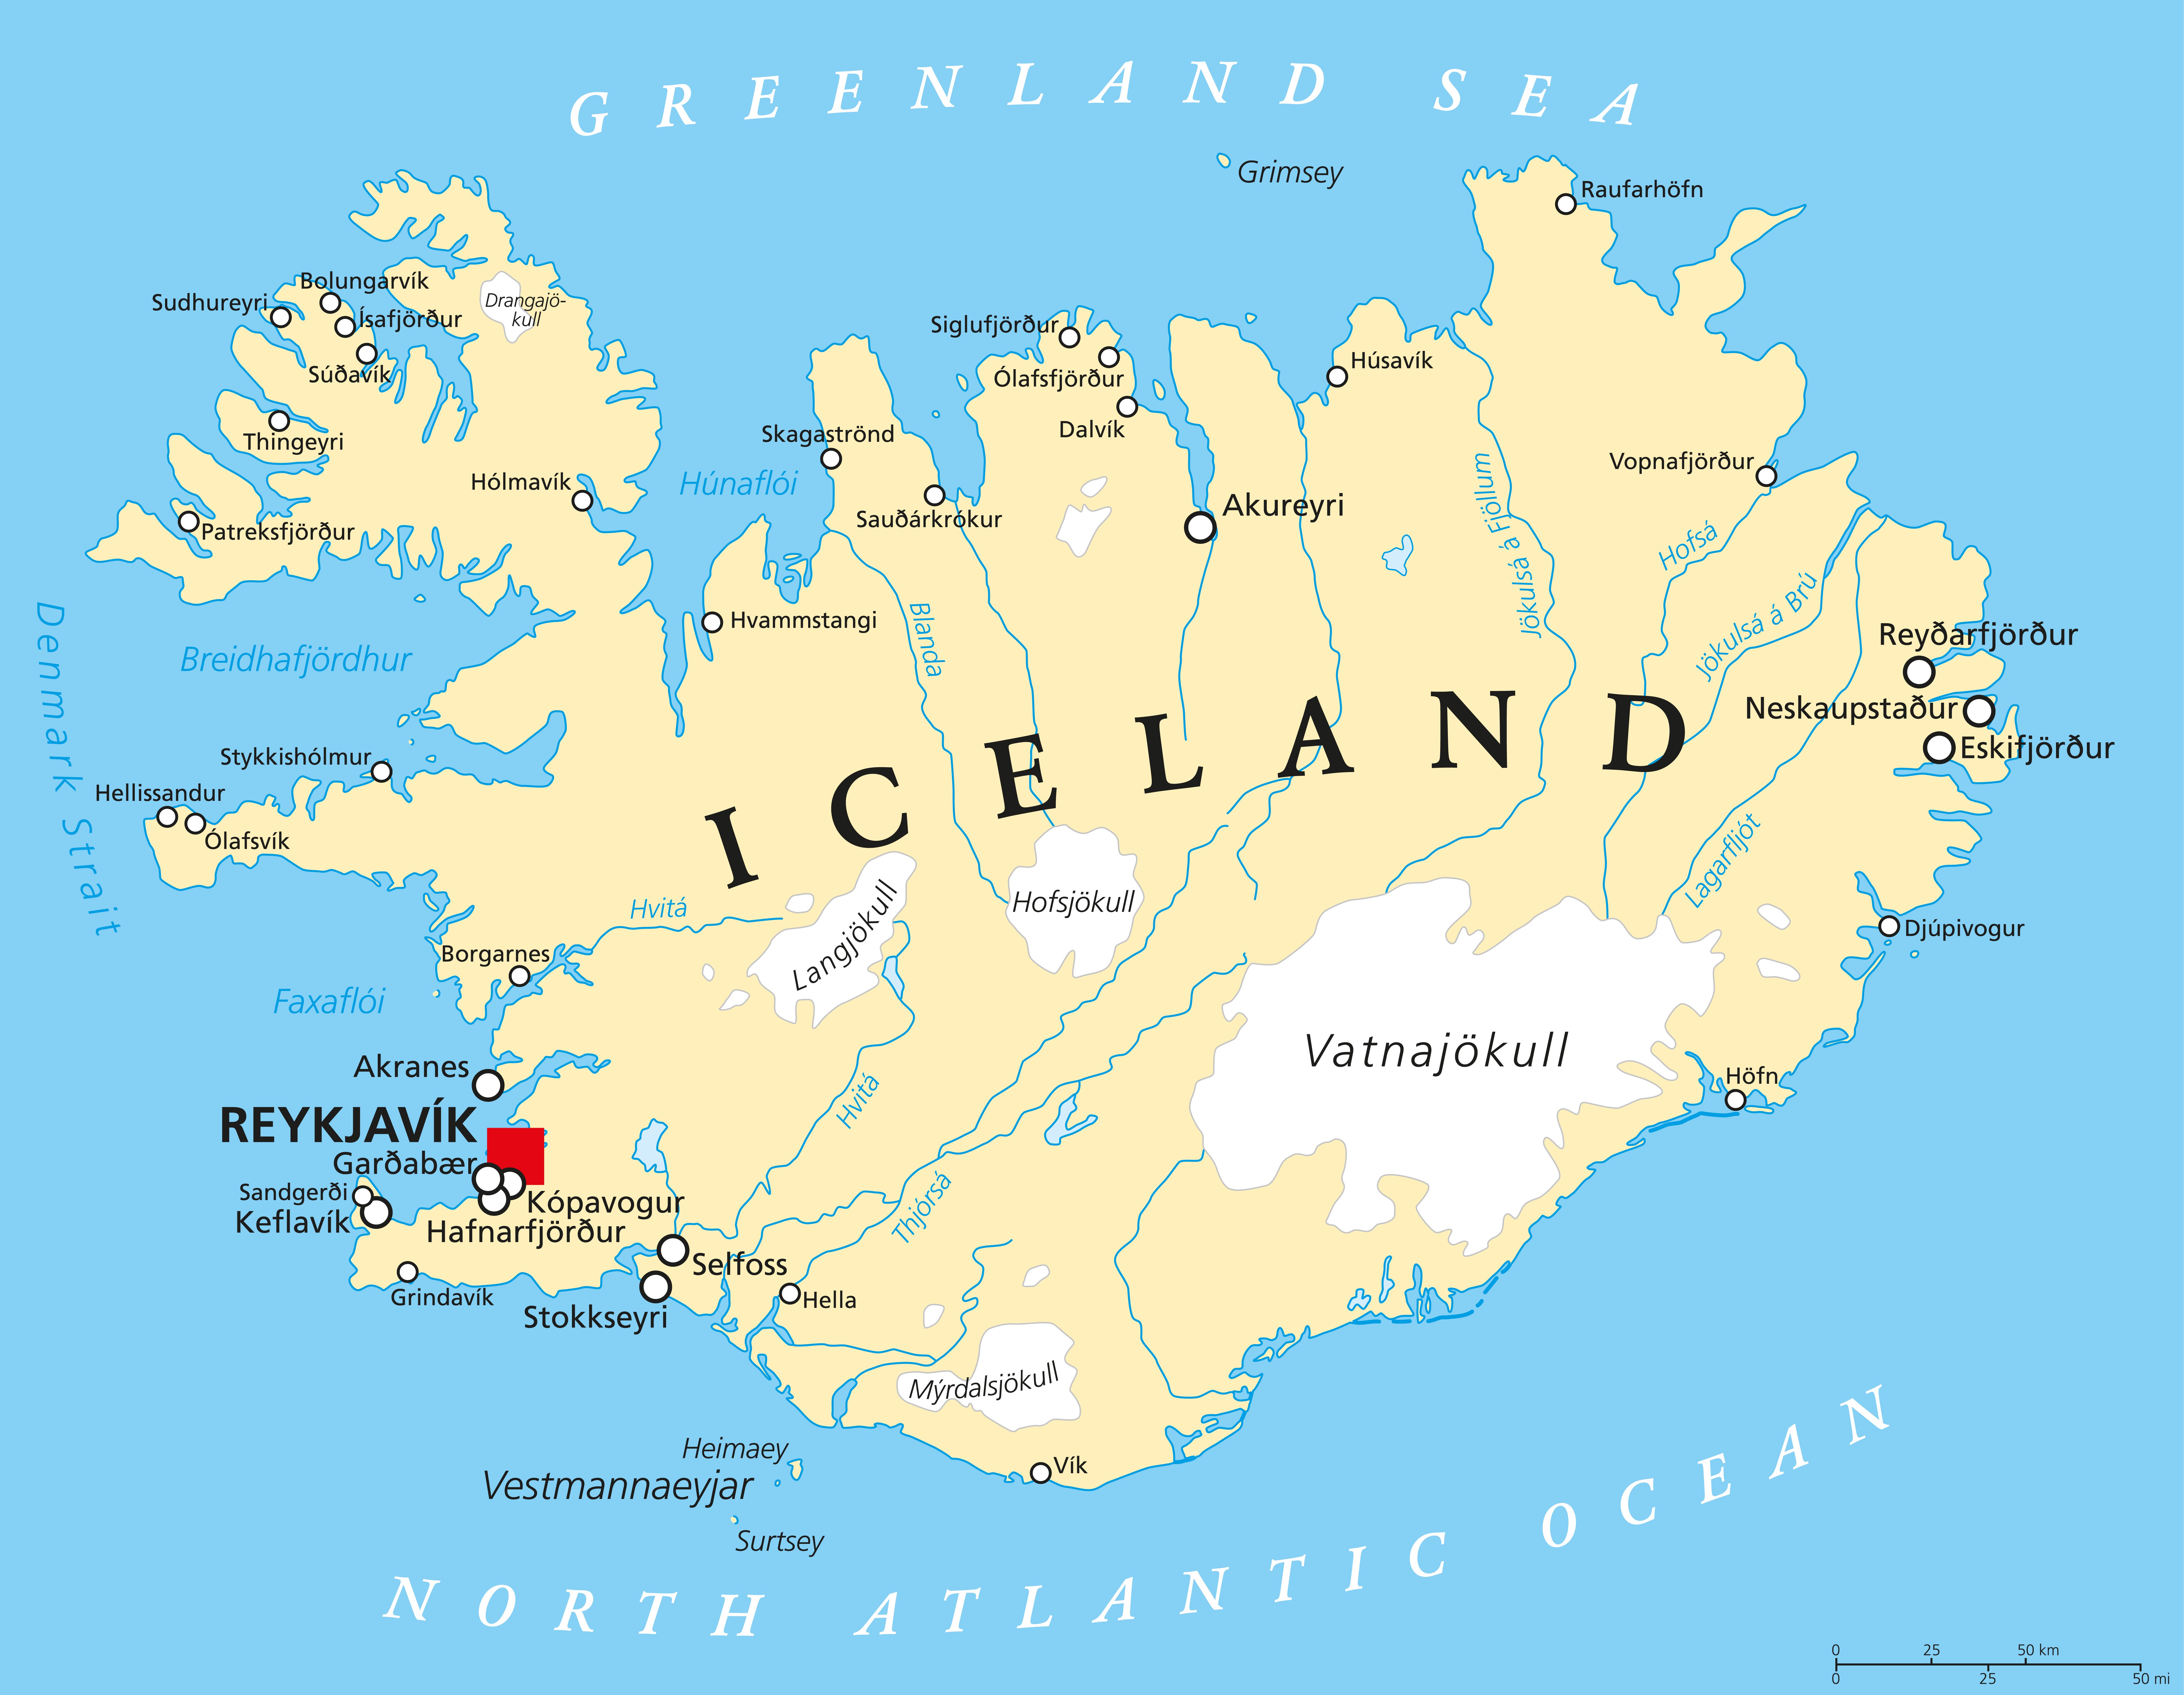 geography-iceland-level-1-activity-for-kids-primaryleap-co-uk